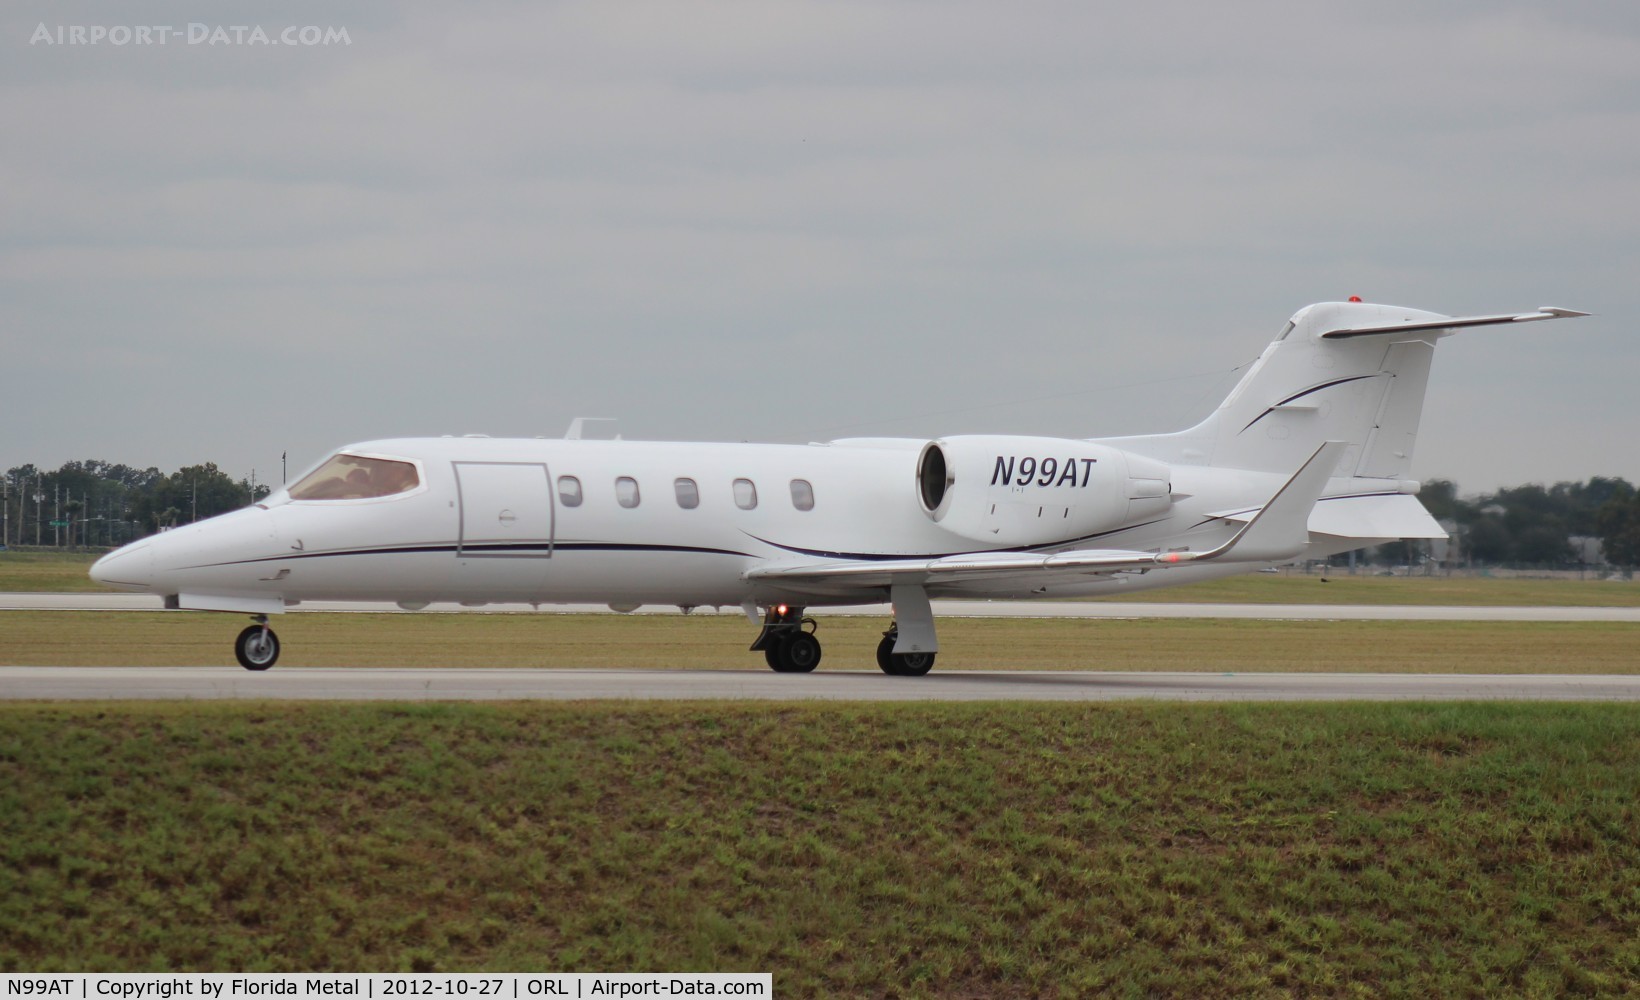 N99AT, 2000 Learjet 31A C/N 31A-202, Lear 31A